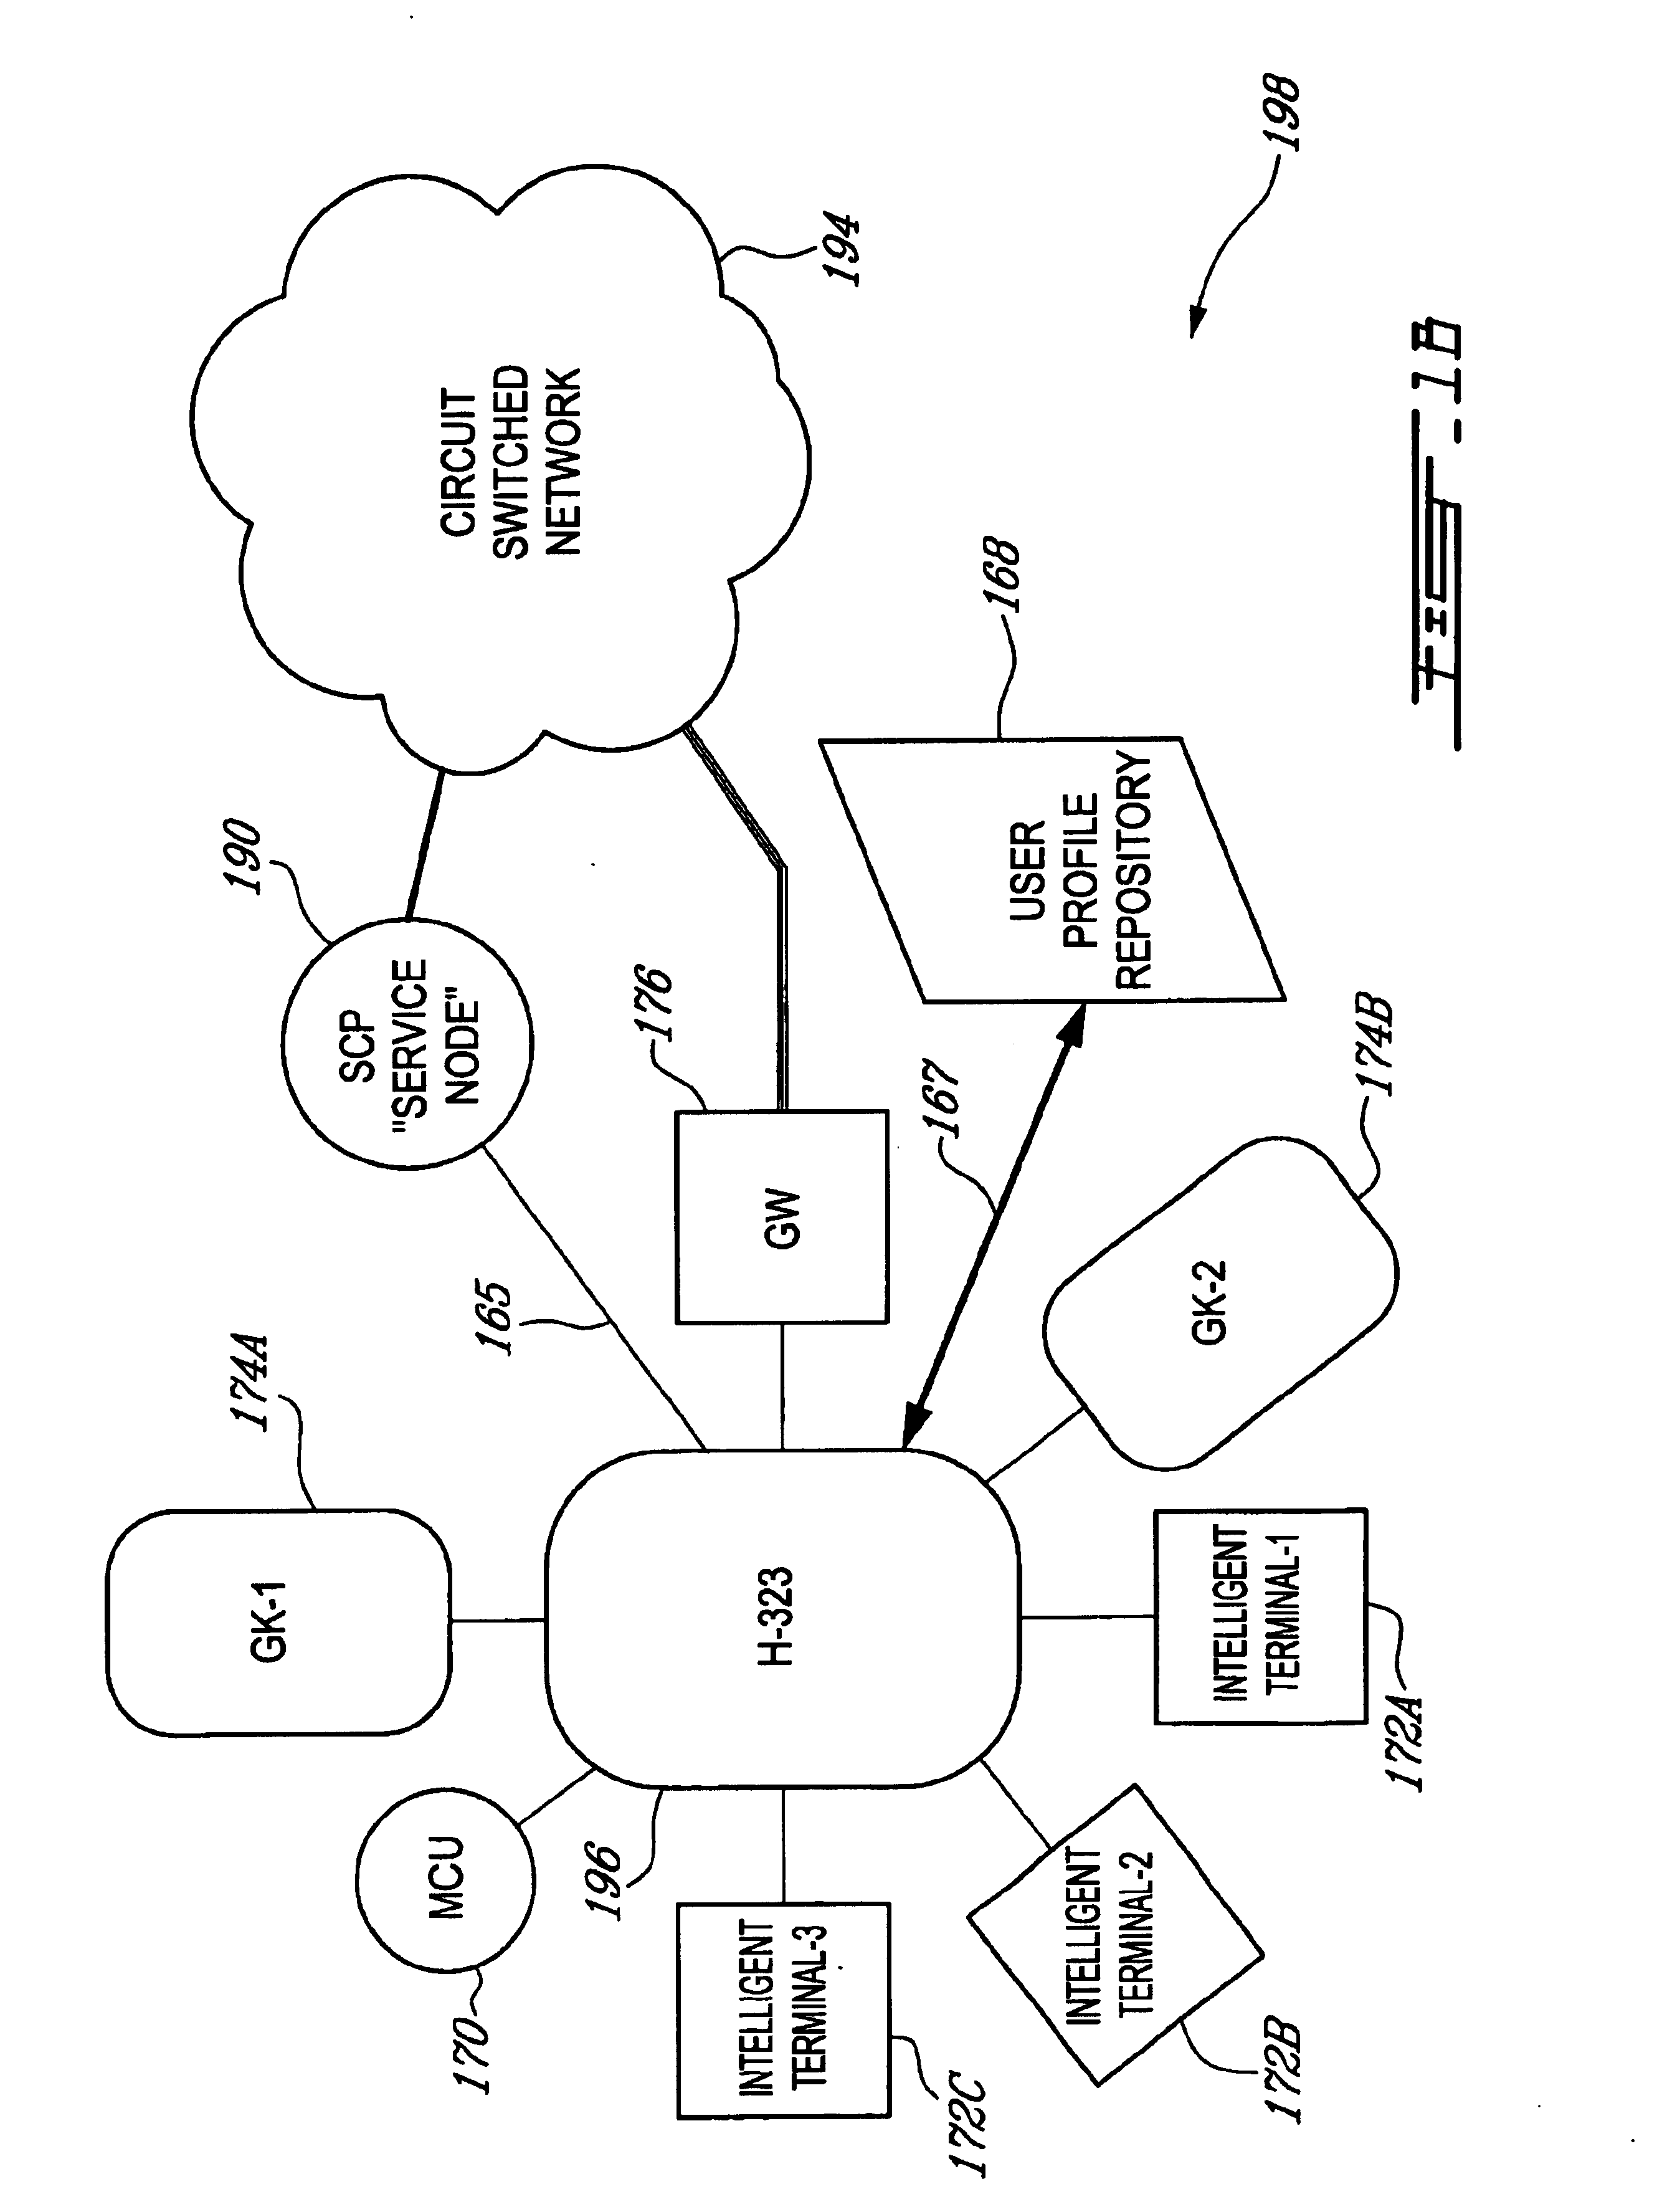 System and method for providing access to service nodes from entities disposed in an integrated telecommunications network